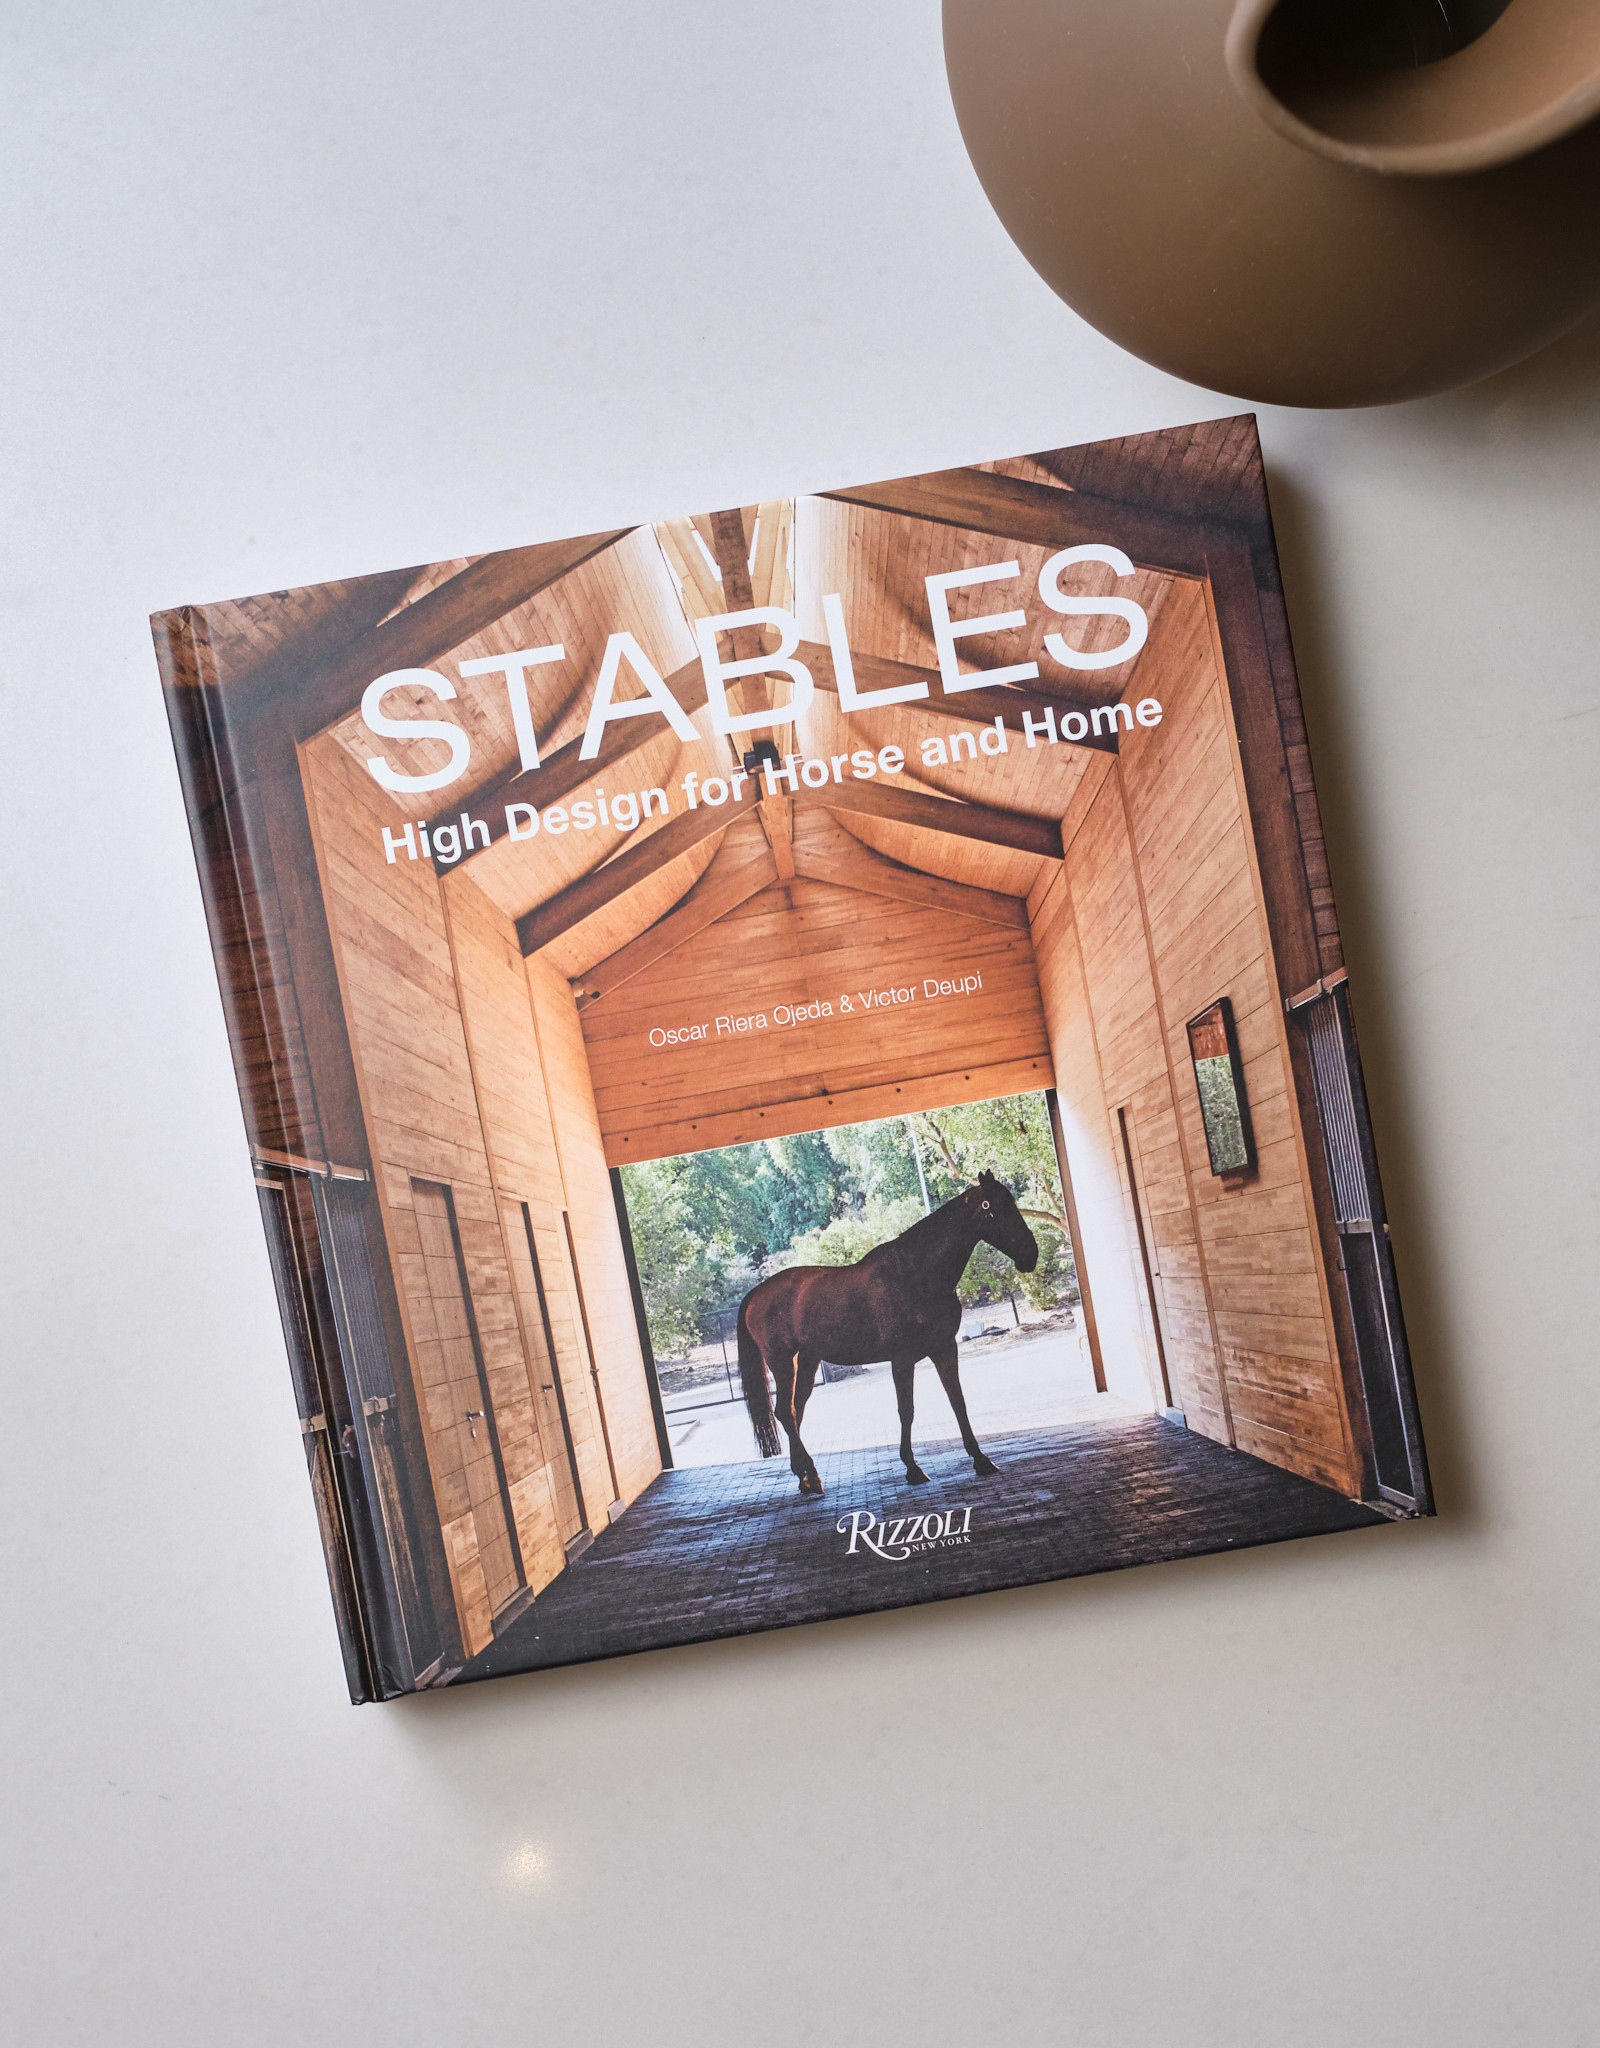 Stables High Design for Horse and Home